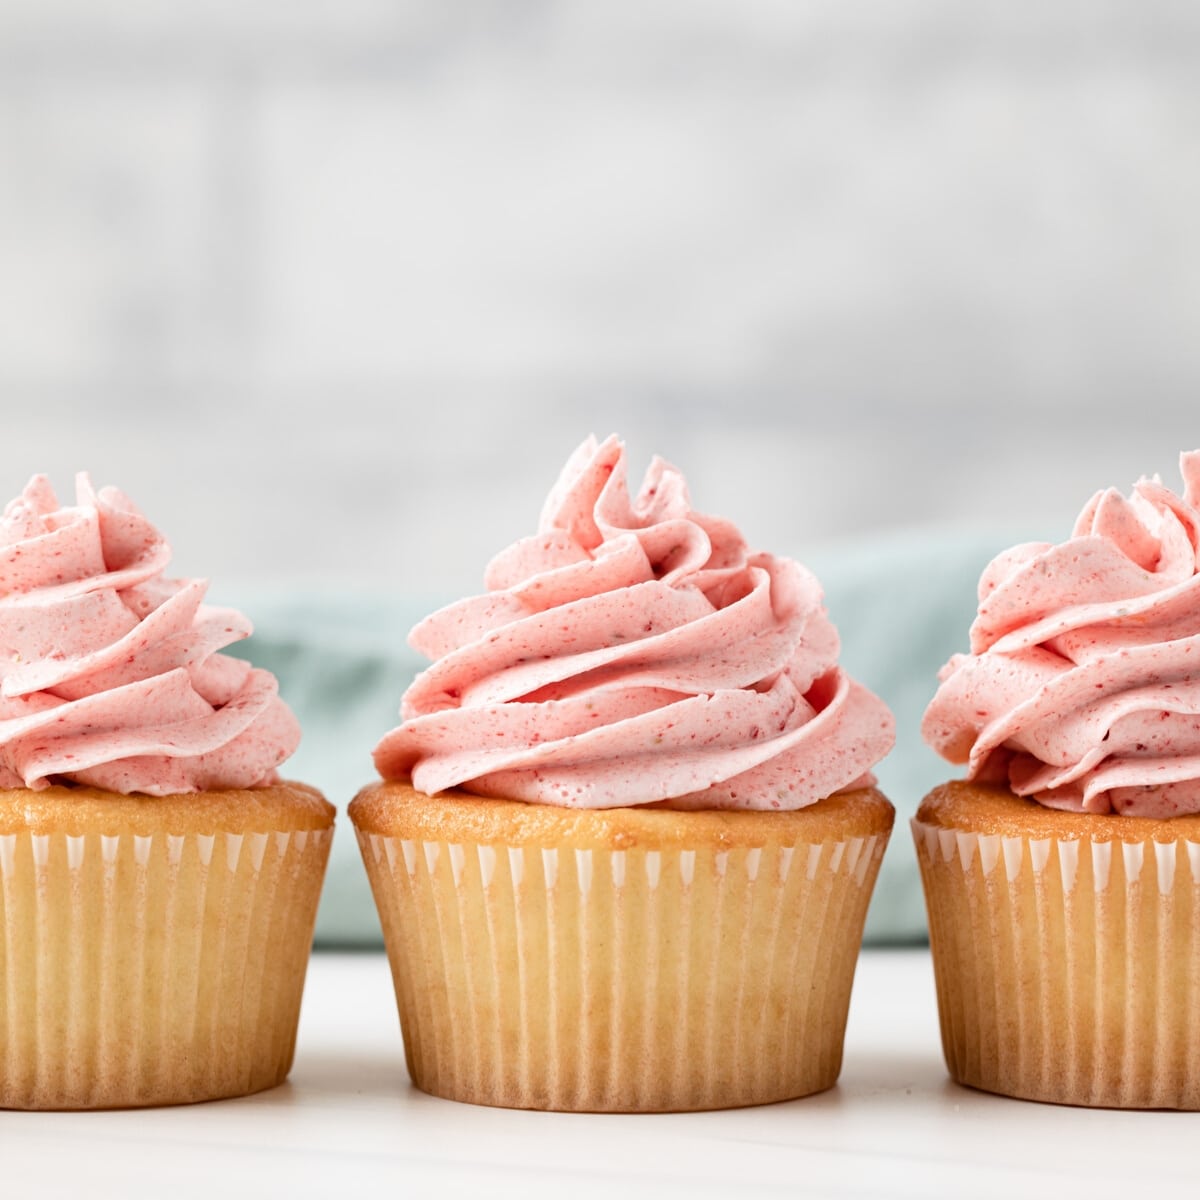 Homemade Strawberry Frosting with Real Strawberries